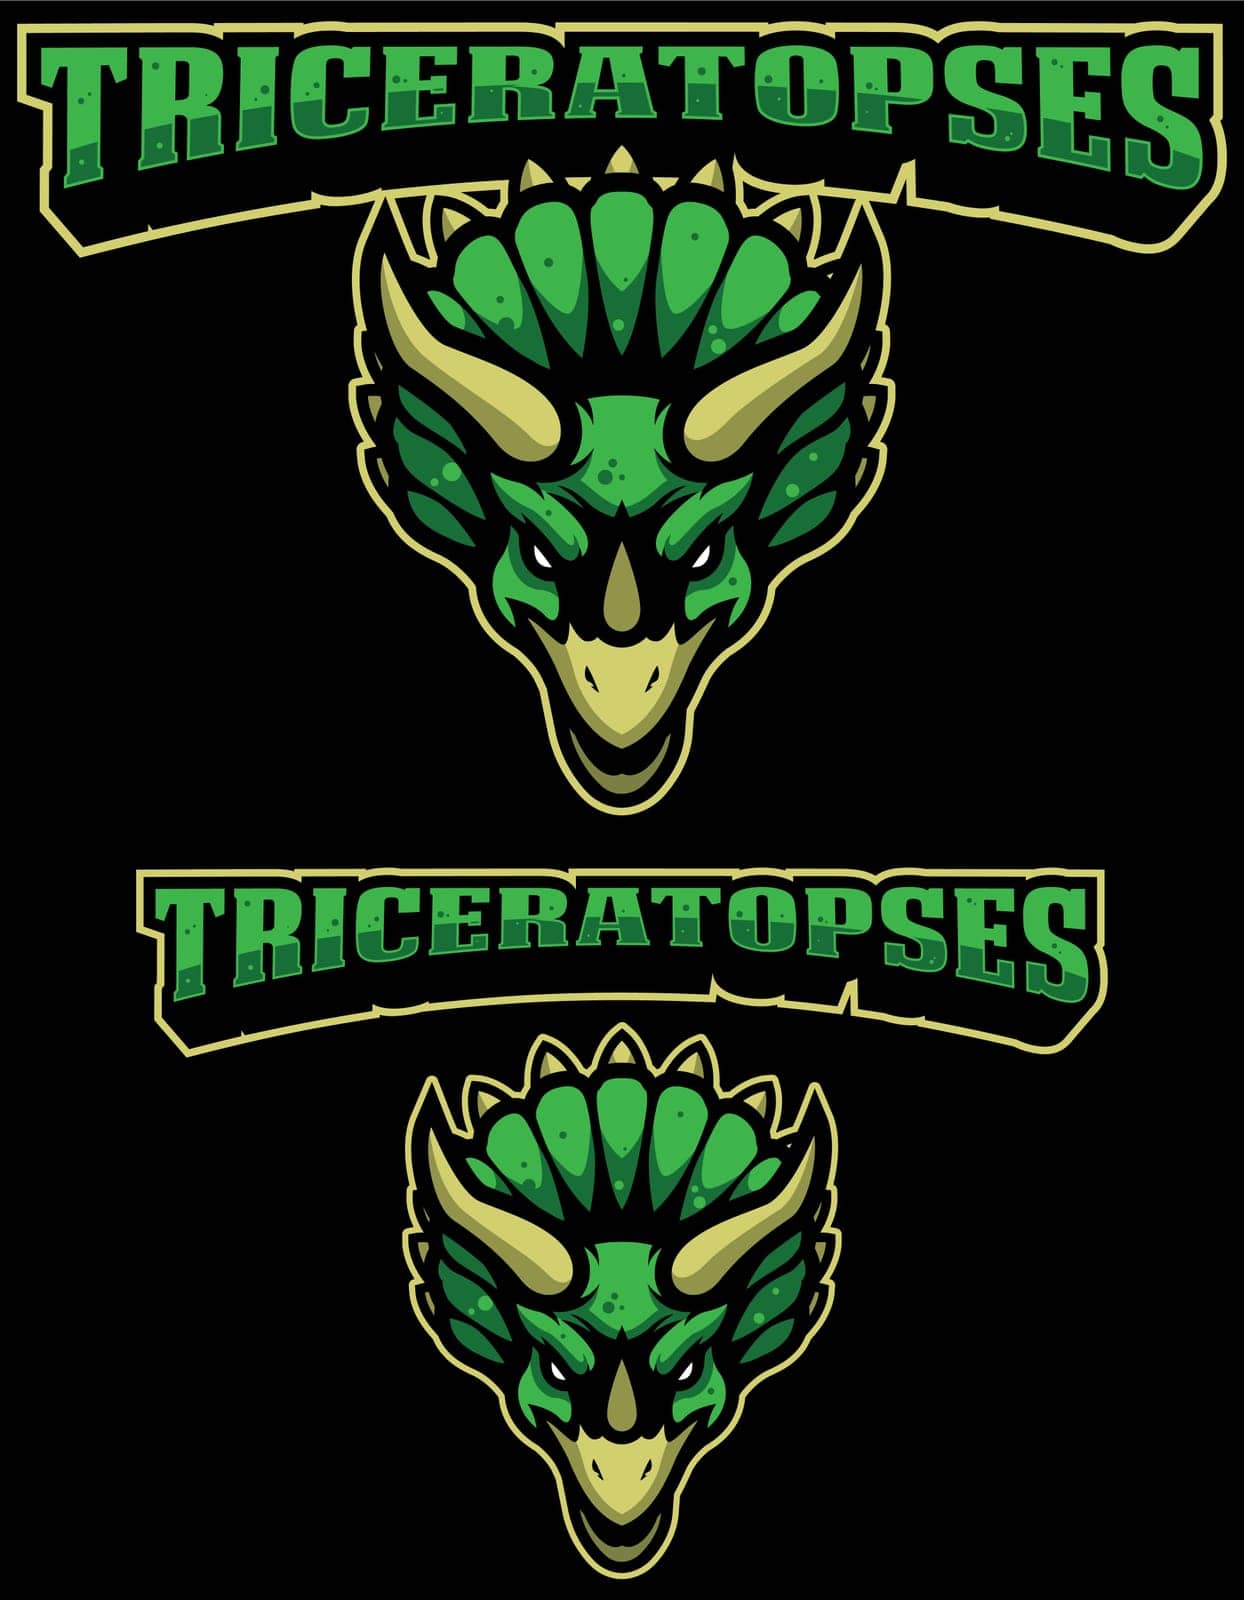 Angry green triceratops dinosaur mascot in 3 versions.